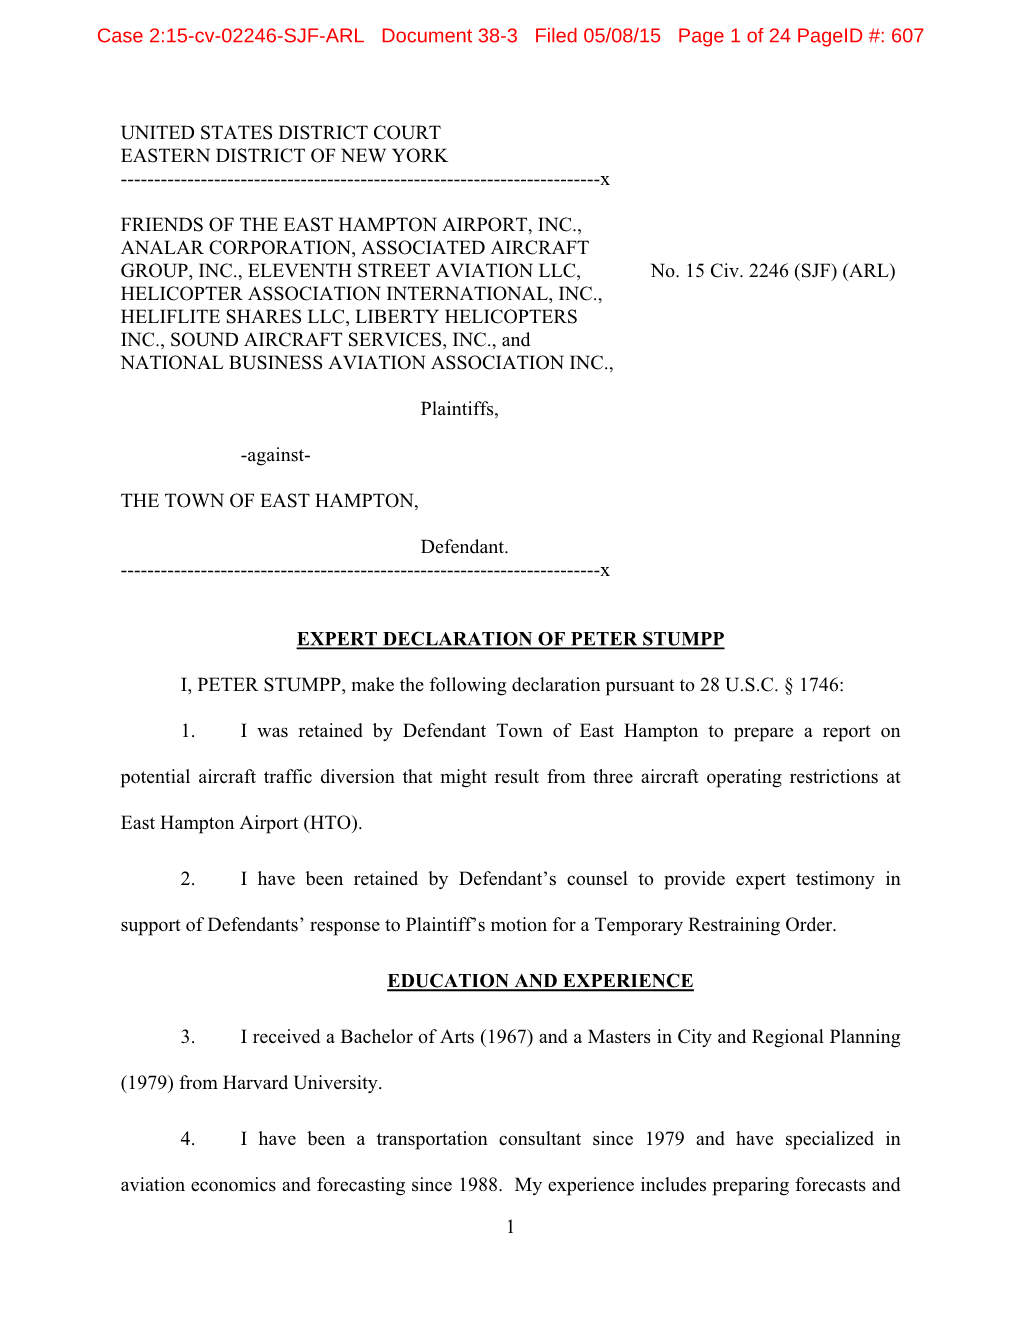 Case 2:15-Cv-02246-SJF-ARL Document 38-3 Filed 05/08/15 Page 1 of 24 Pageid #: 607